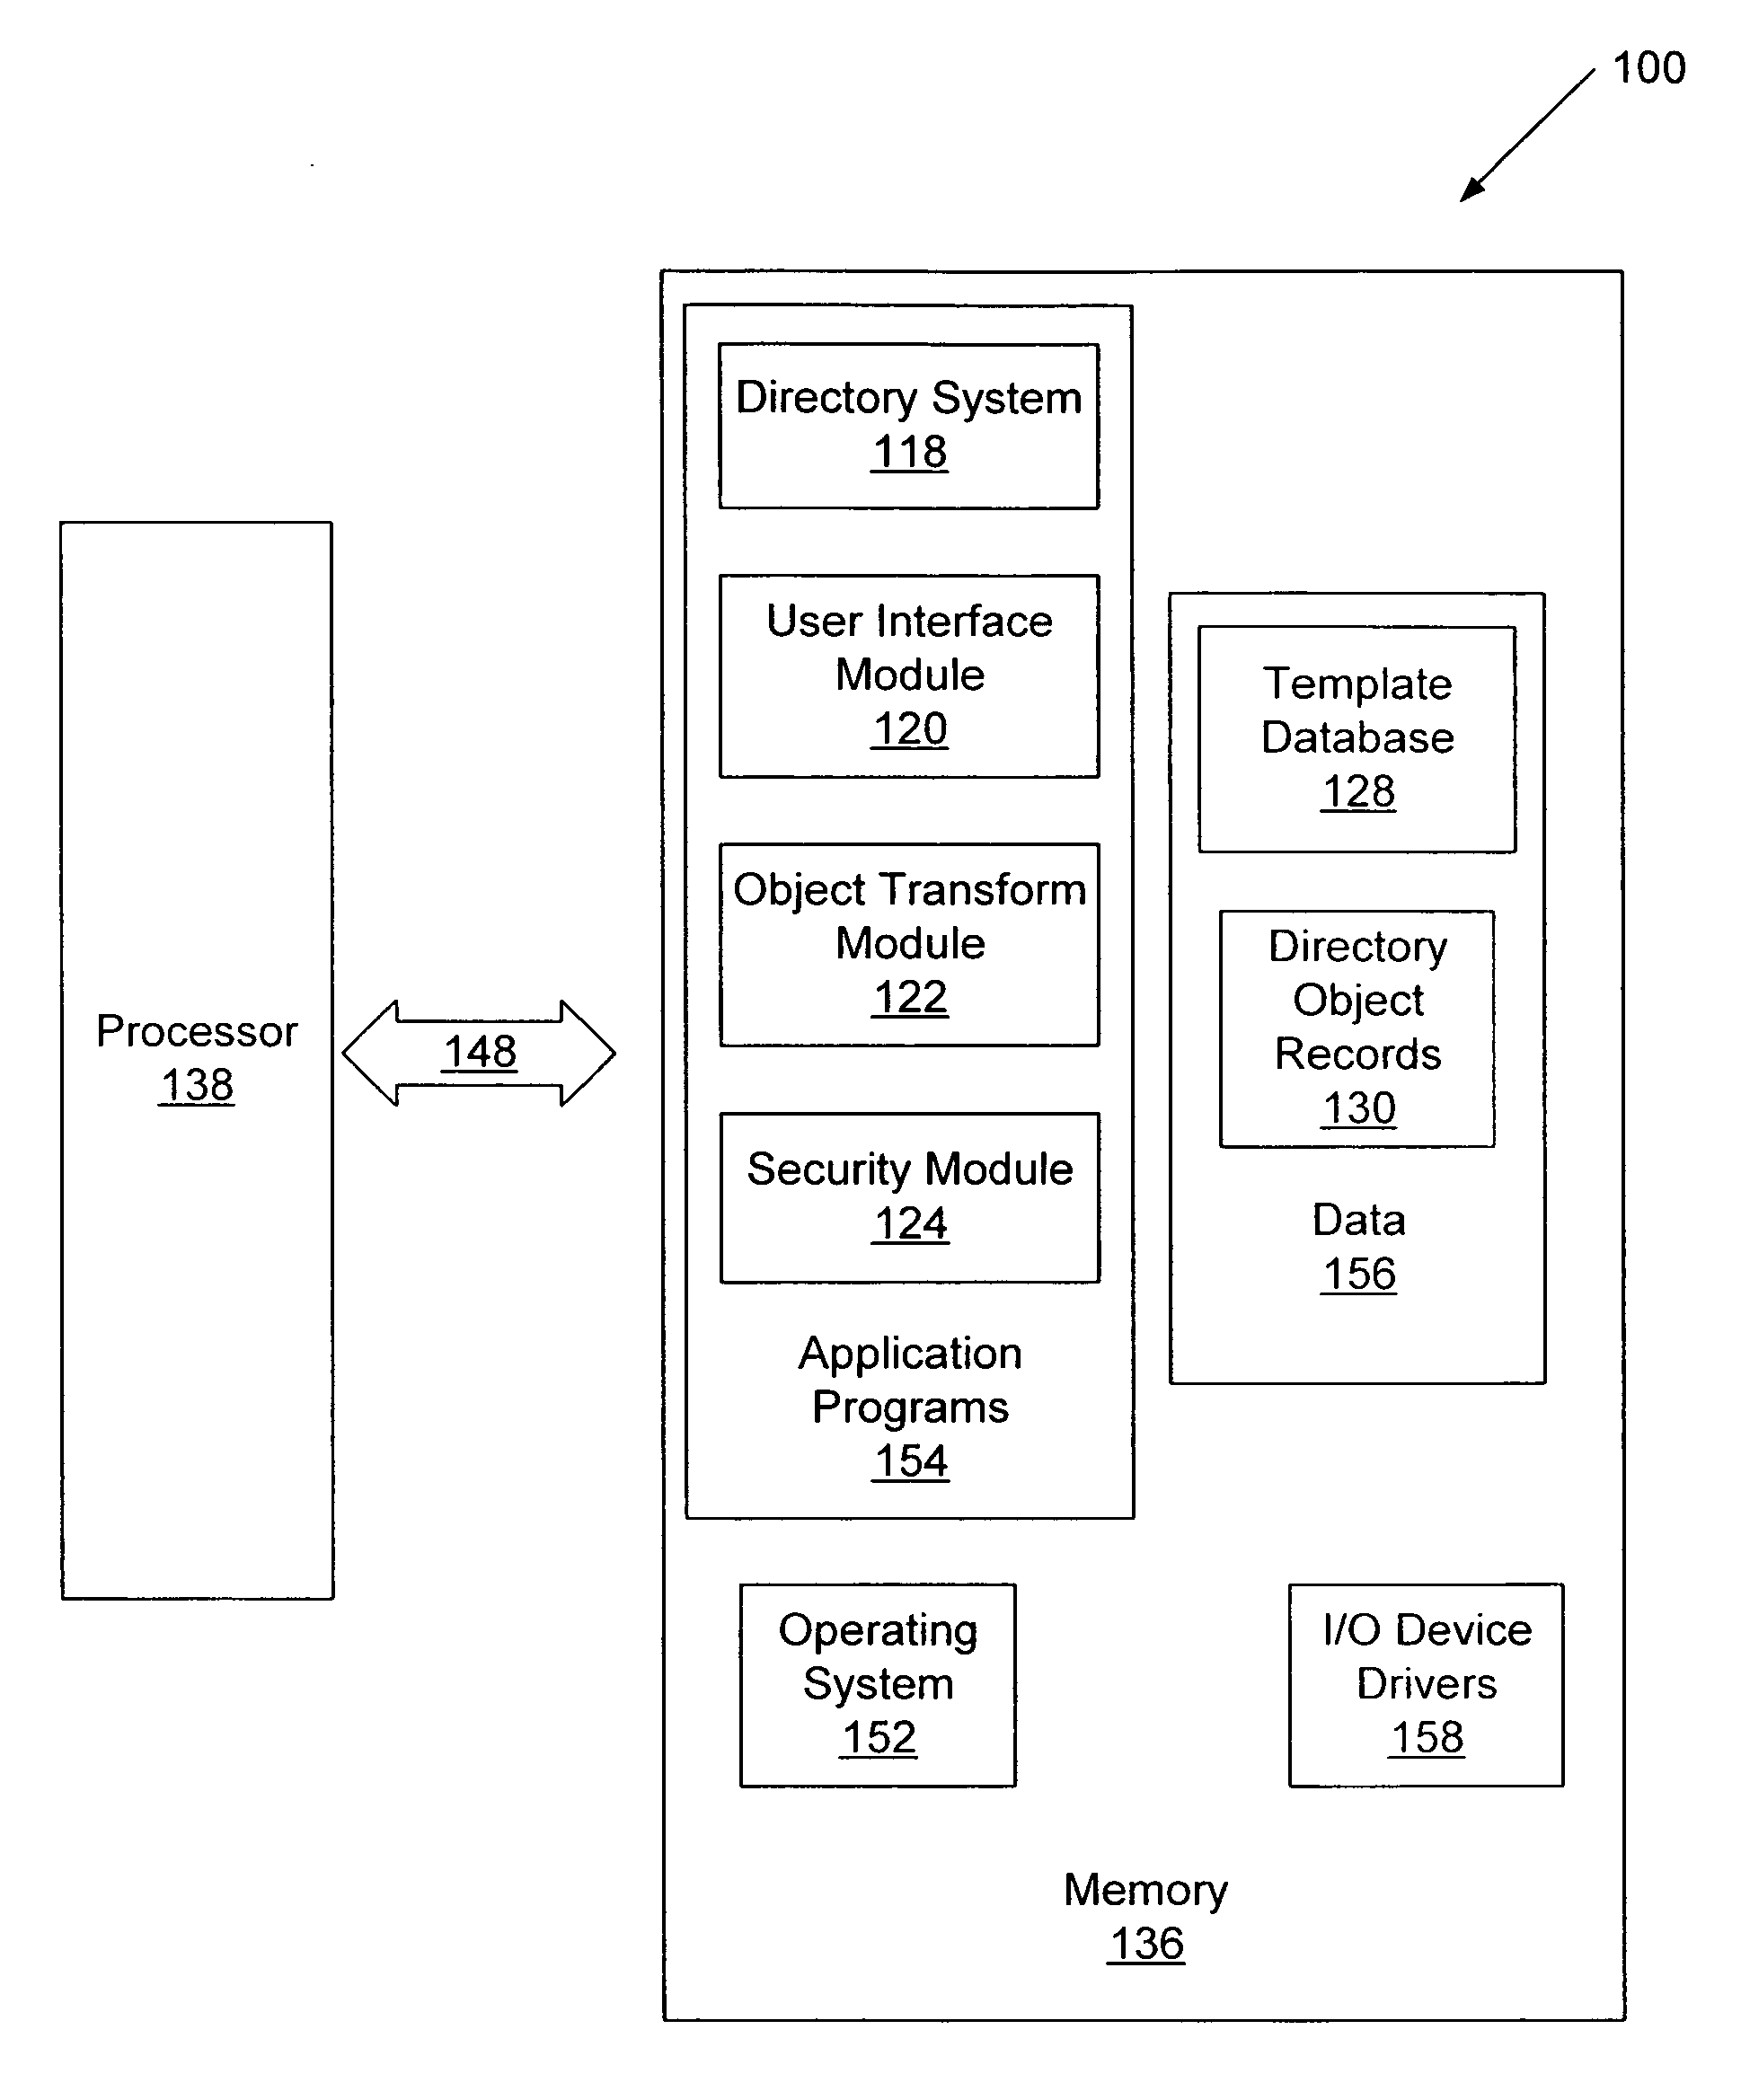 Methods, systems and computer program products for changing objects in a directory system